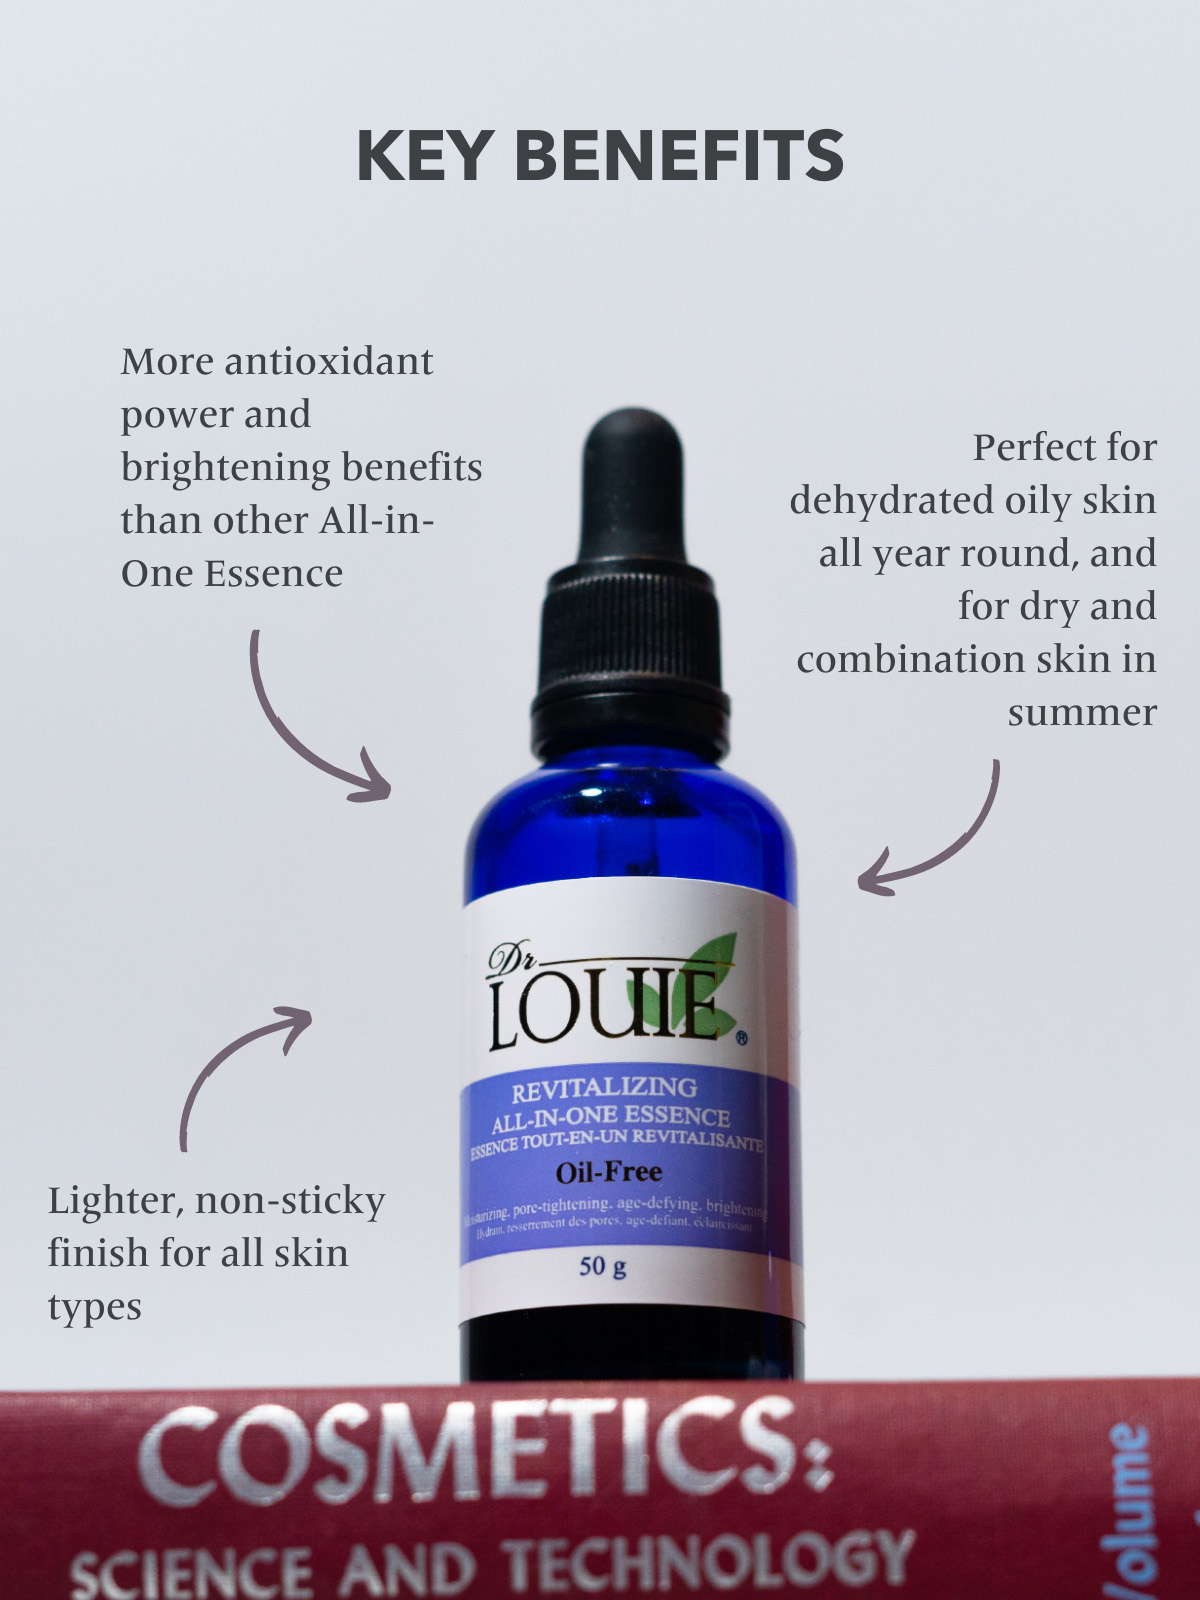 Revitalizing All-in-One Essence Oil Free